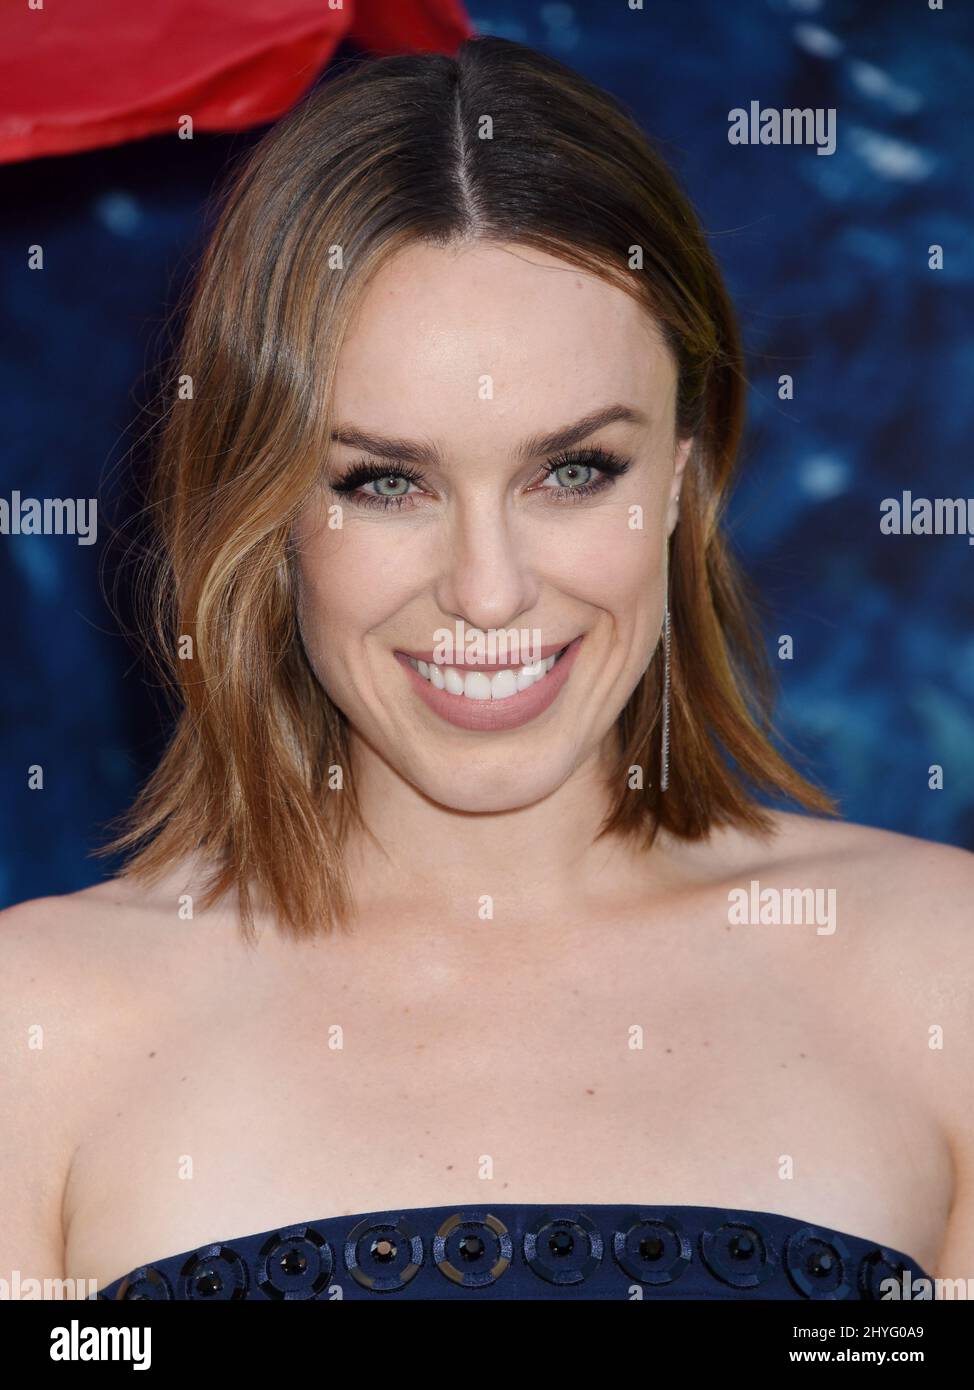 Jessica McNamee at Warner Bros. 'THE MEG' U.S. Premiere held at the TCL Chinese Theatre on August 6, 2018 in Hollywood Stock Photo